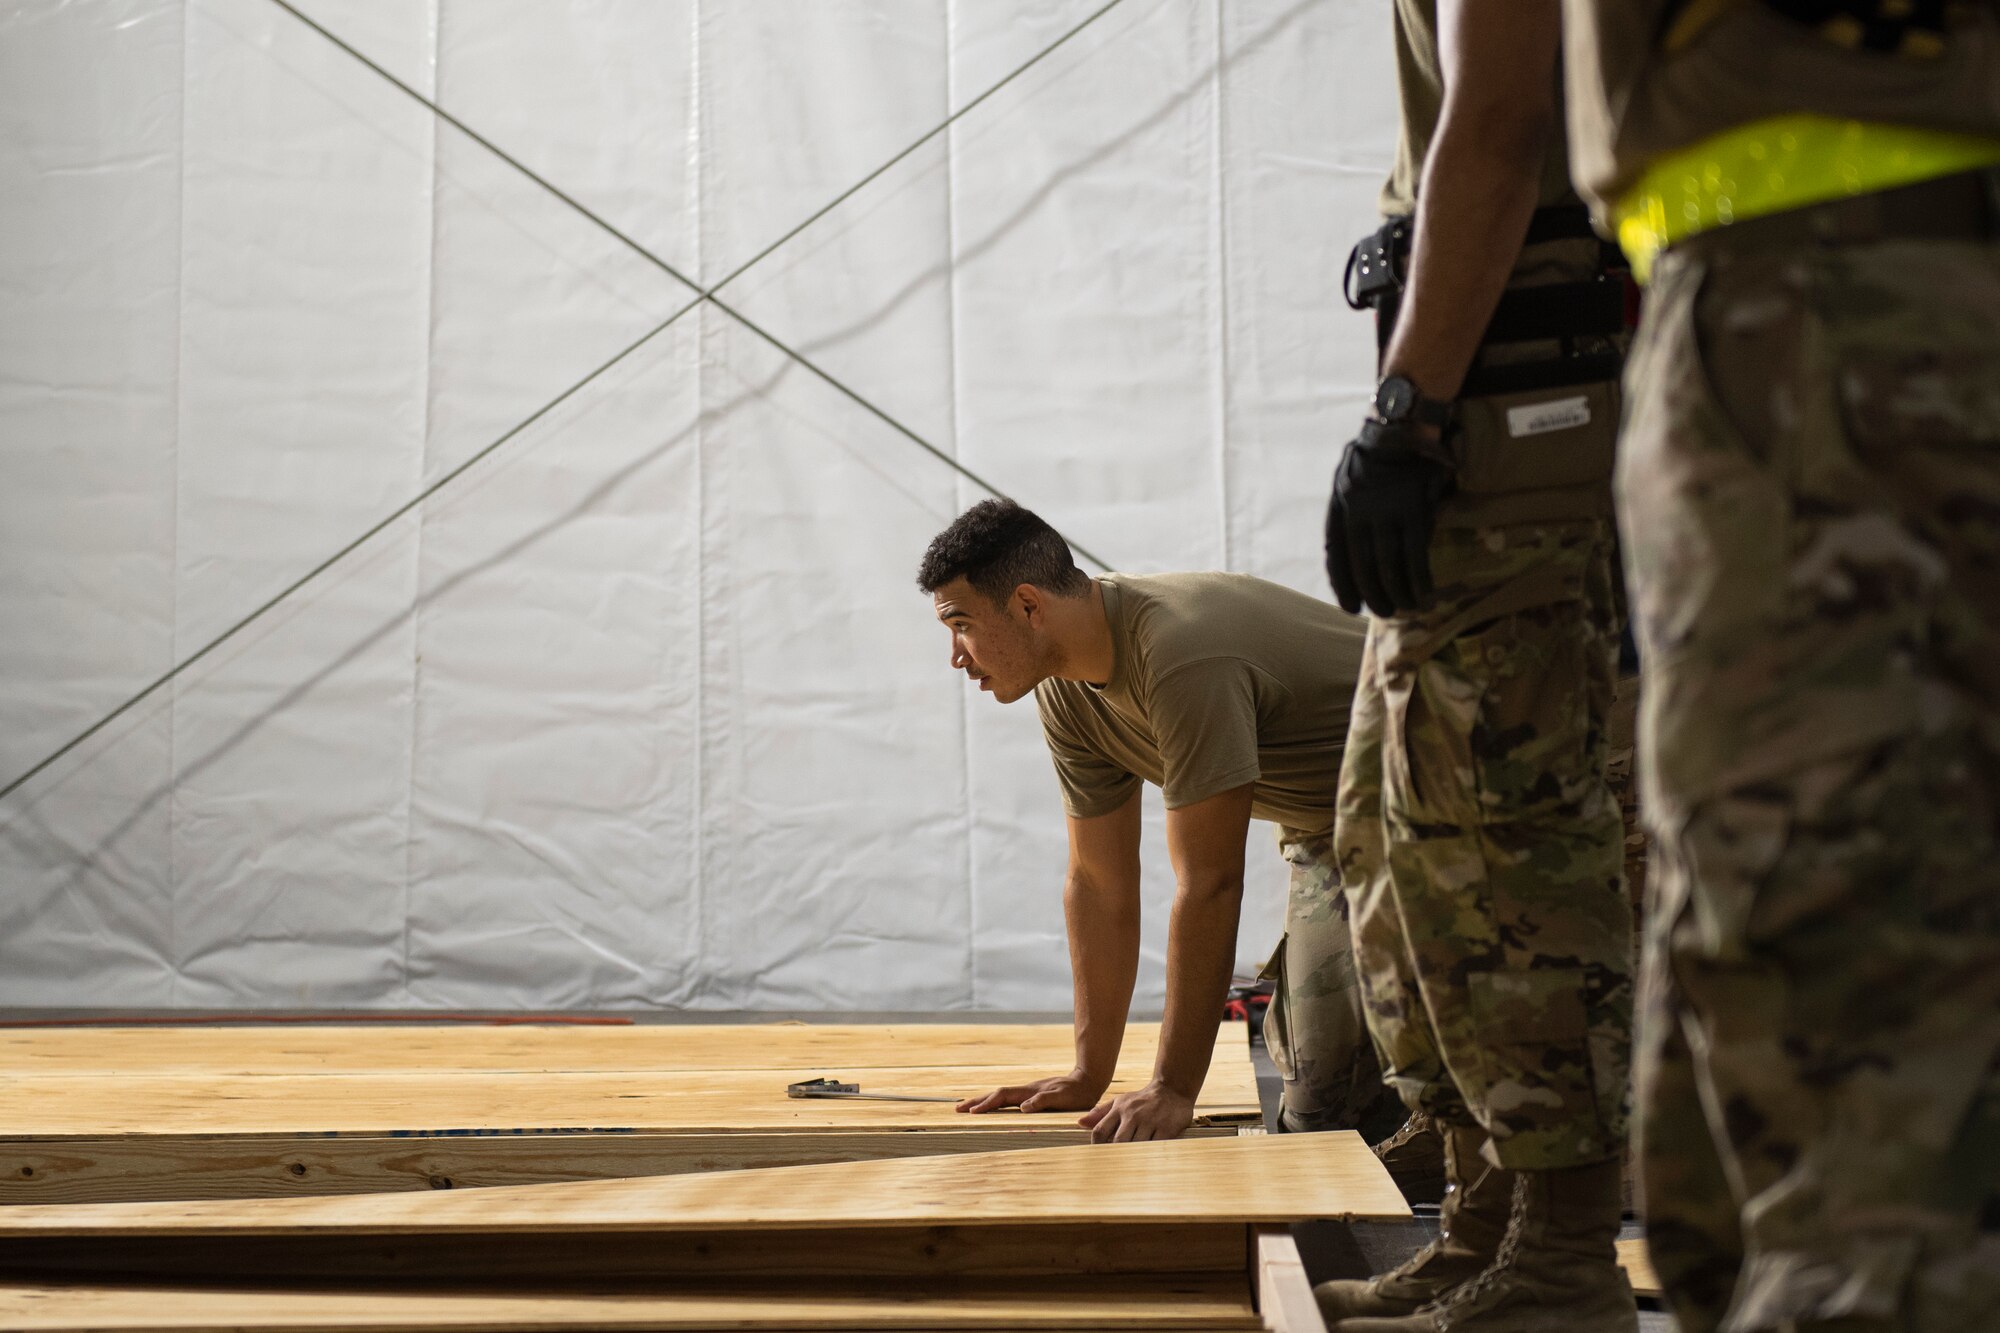 An Airman from Task Force-Holloman lines up wood to build partitions for Afghan evacuee living quarters on Holloman Air Force Base, New Mexico, Sept. 4, 2021. The Department of Defense, through U.S. Northern Command, and in support of the Department of State and Department of Homeland Security, is providing transportation, temporary housing, medical screening, and general support for at least 50,000 Afghan evacuees at suitable facilities, in permanent or temporary structures, as quickly as possible. This initiative provides Afghan evacuees essential support at secure locations outside Afghanistan. (U.S. Air Force photo by Staff Sgt. Kenneth Boyton)